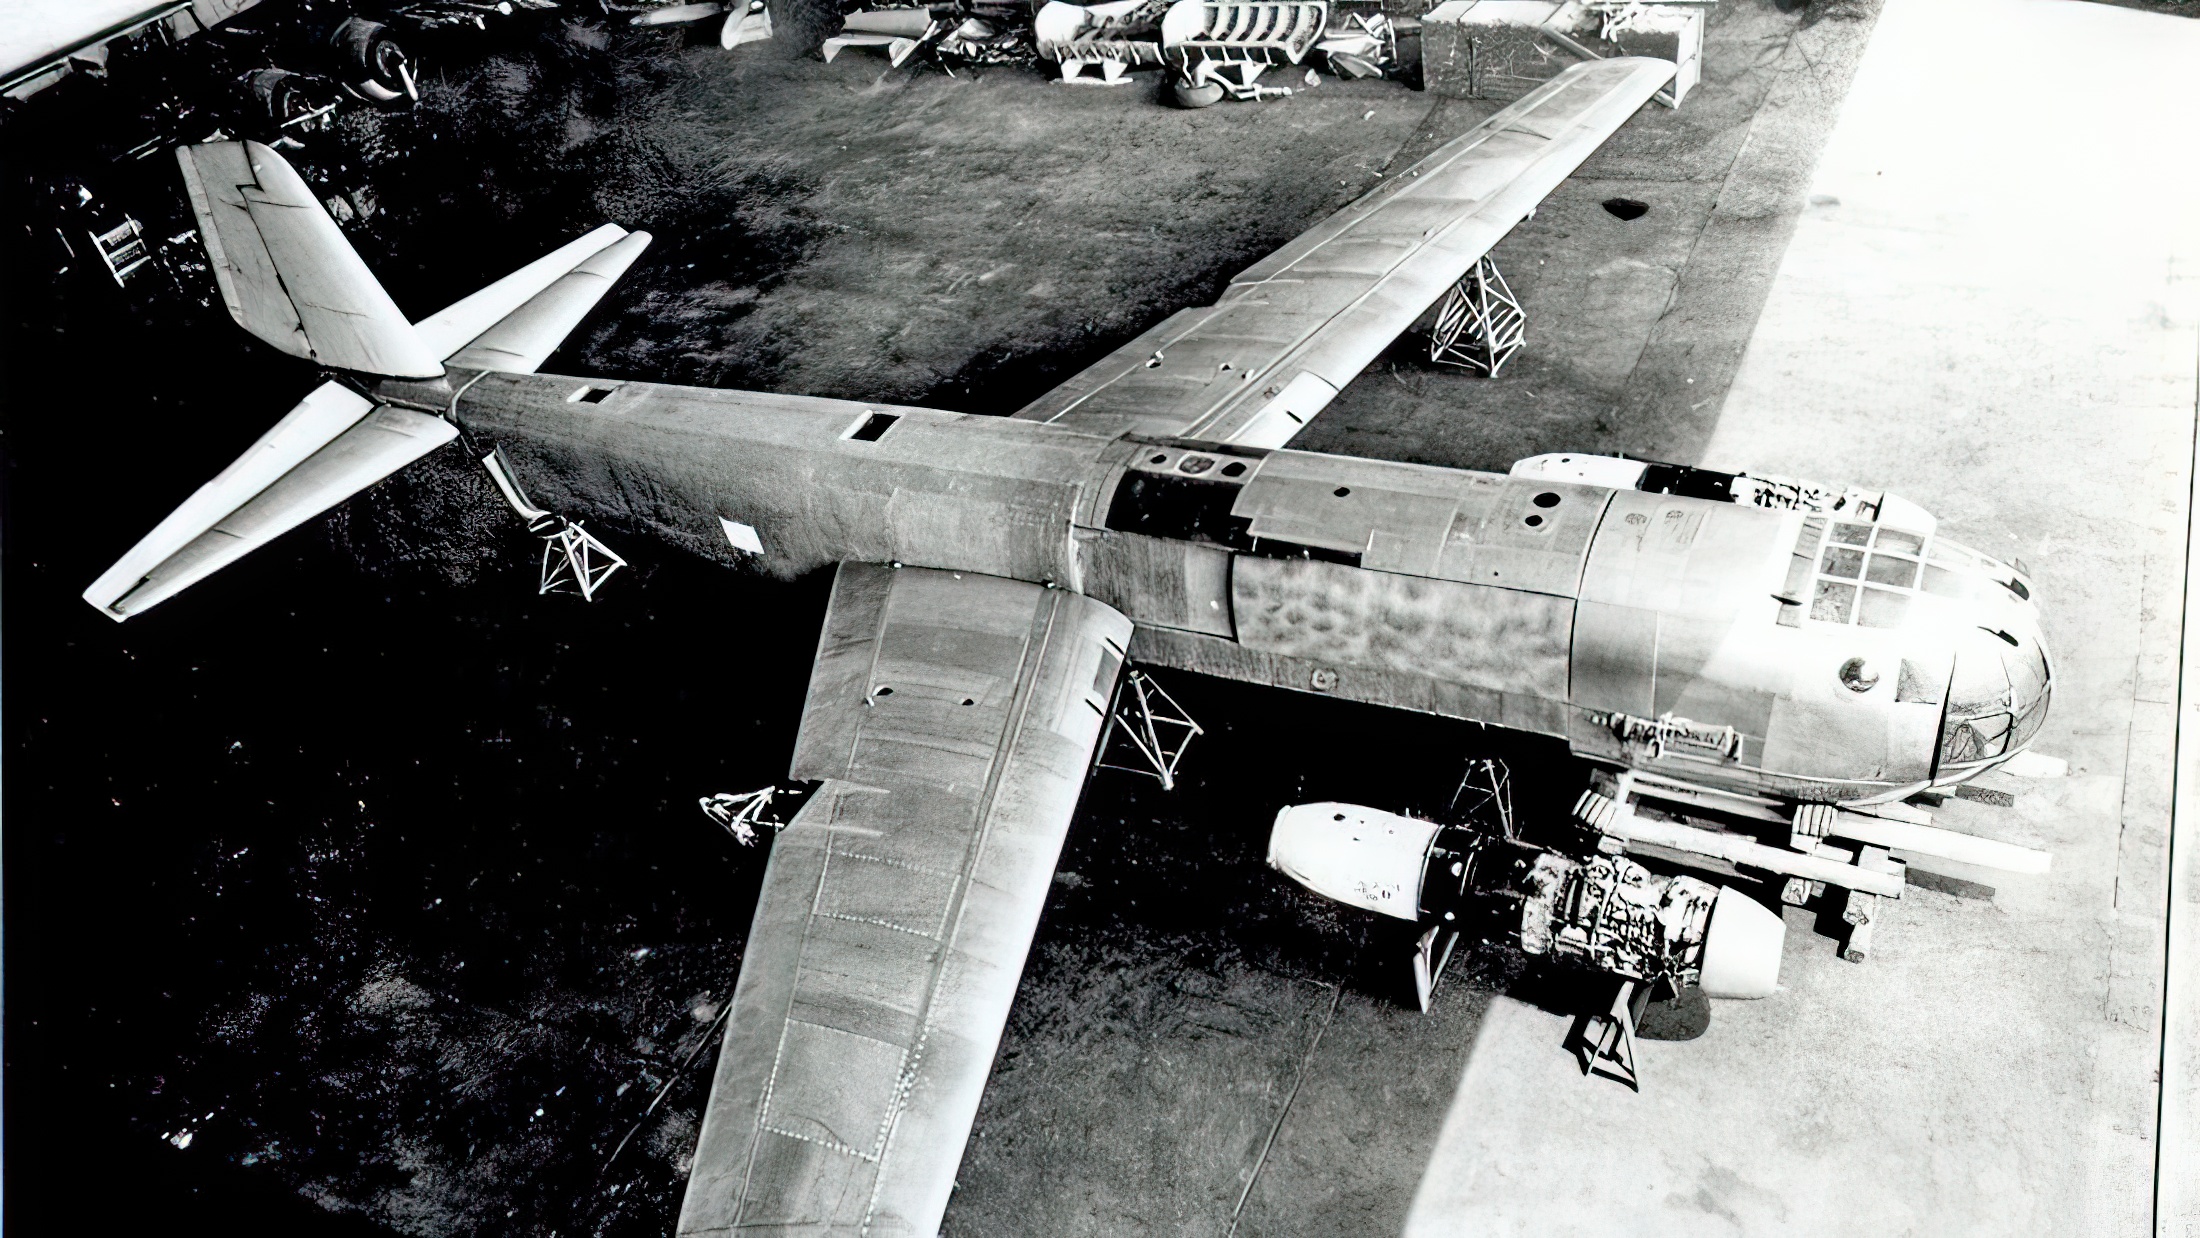 First Ju 287 prototype (Ju 287 V1) nearing completion at Brandis